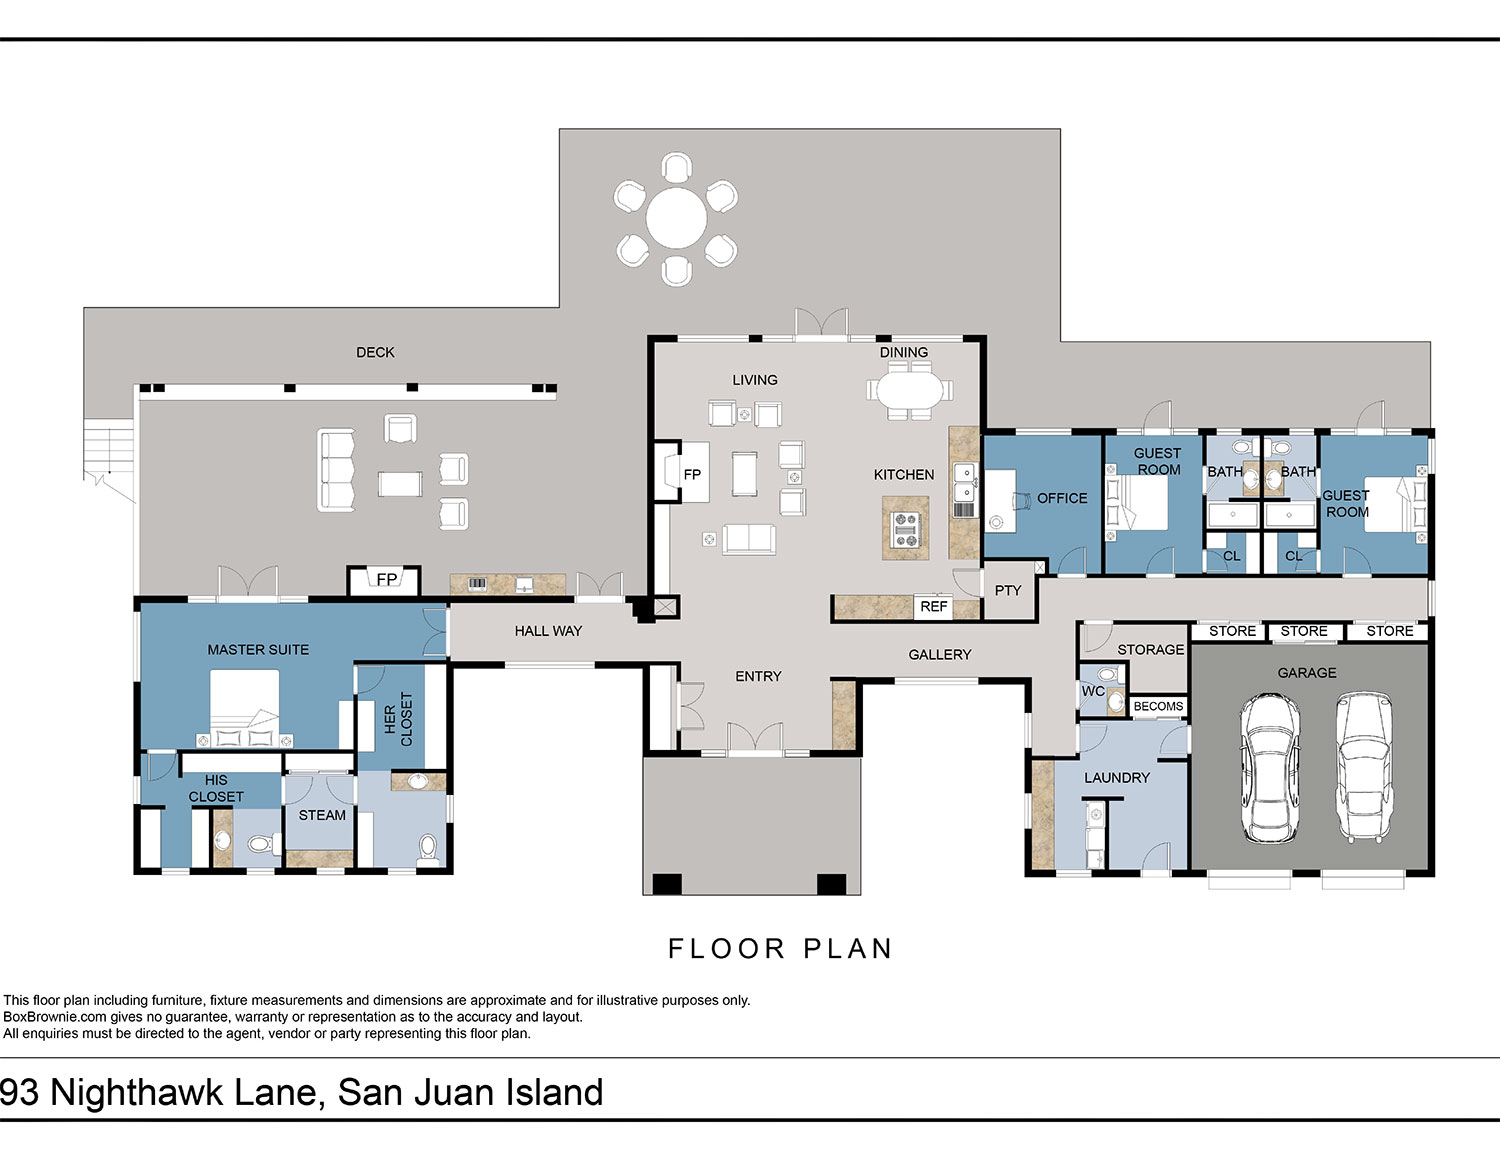 Detailed image of the floor plan